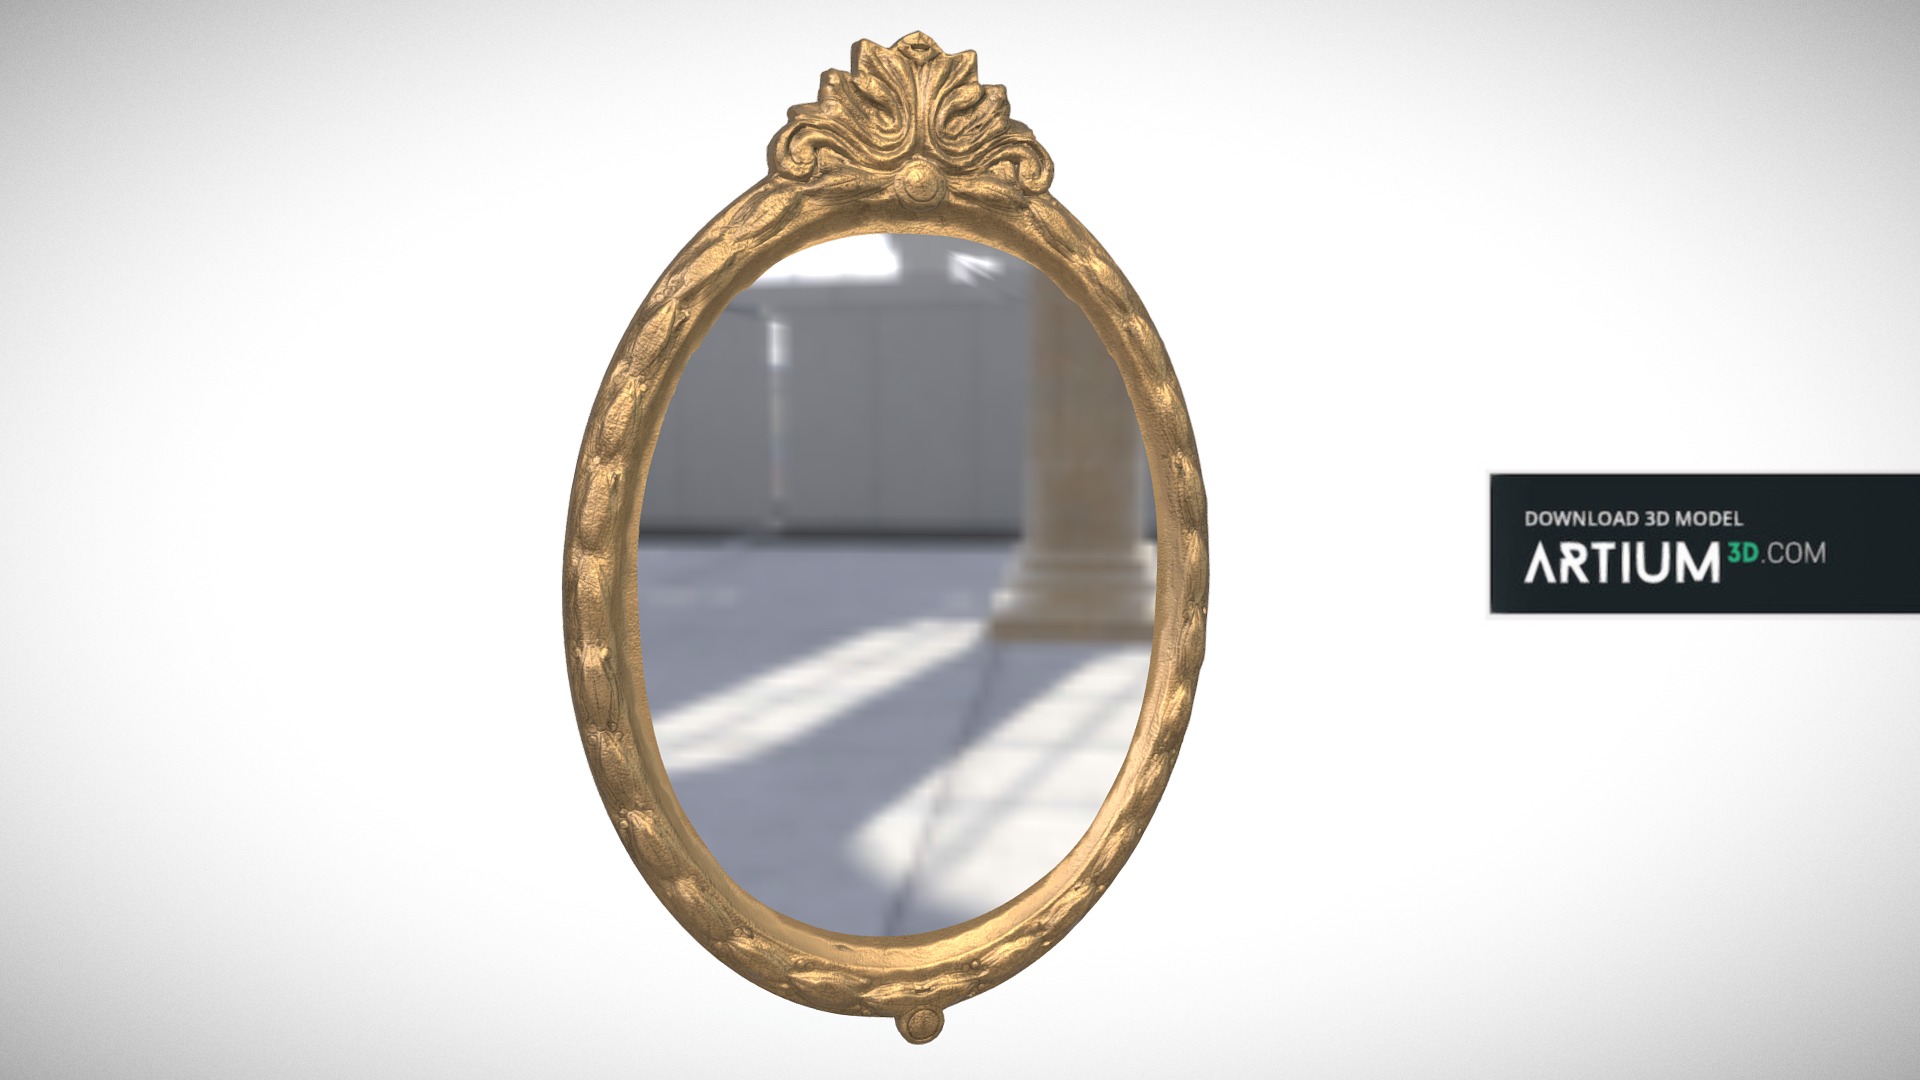 3D model Neoclassical wall mirror – France about 1900 - This is a 3D model of the Neoclassical wall mirror – France about 1900. The 3D model is about a gold and silver ring.